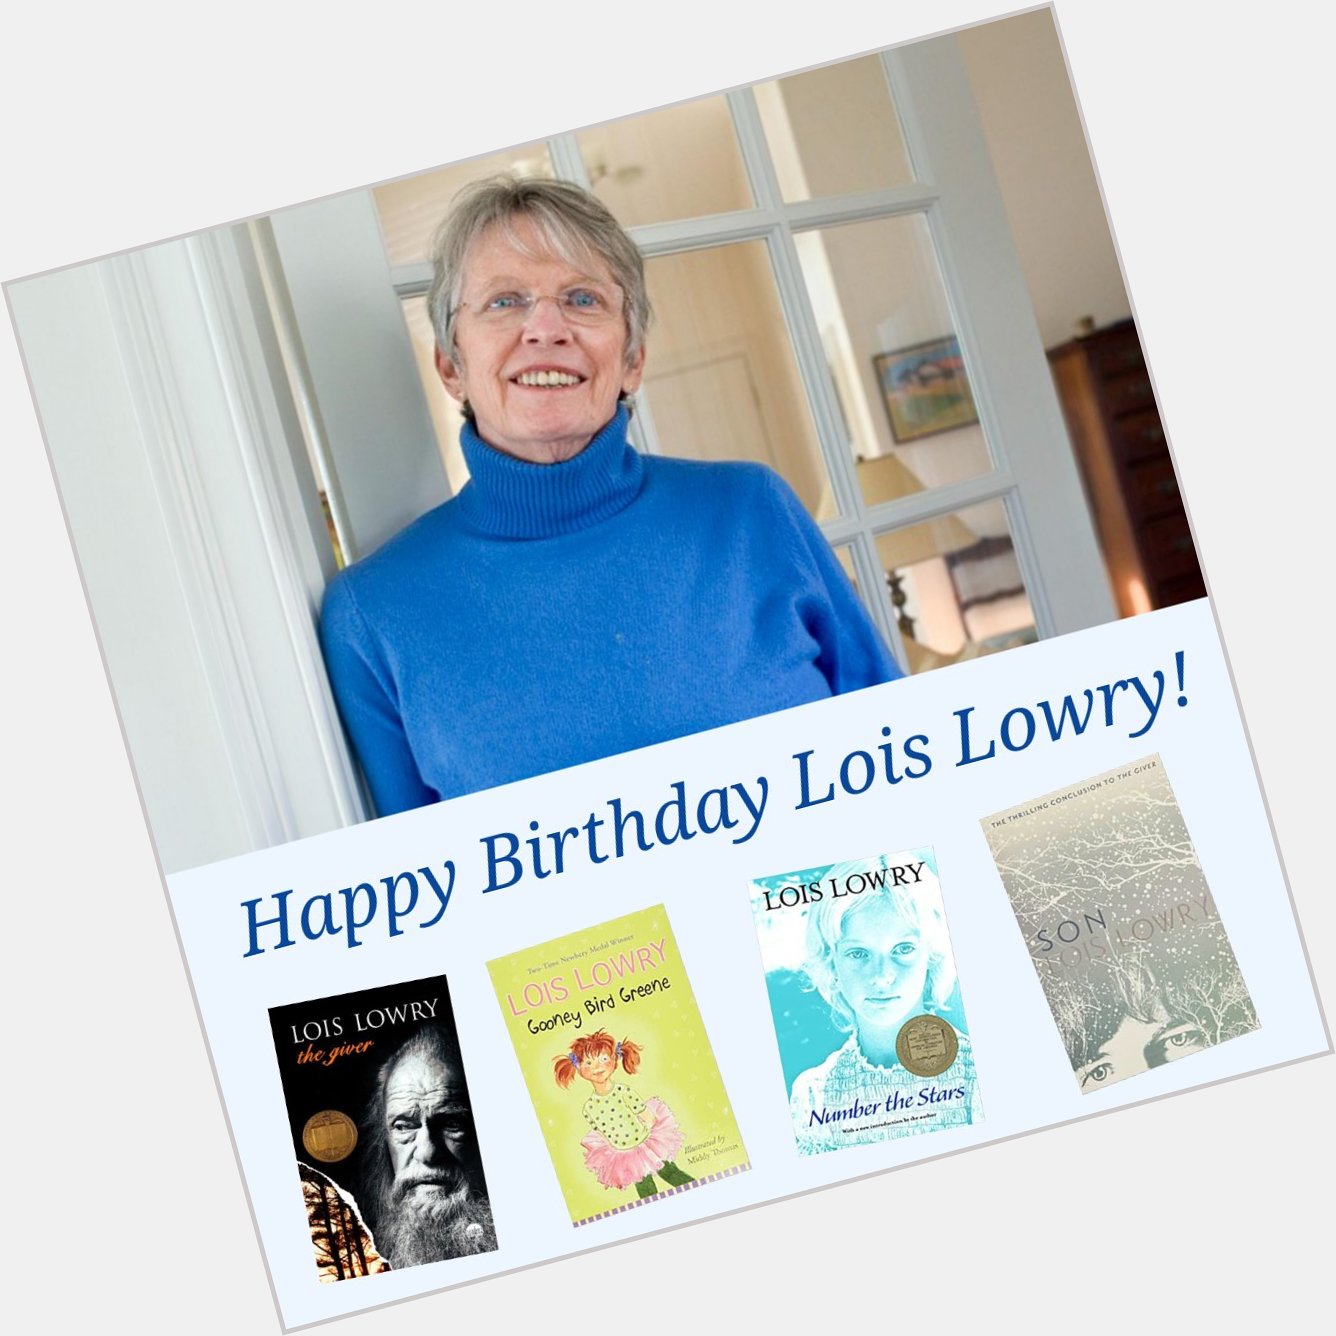 Happy Birthday to beloved author, Lois Lowry! 